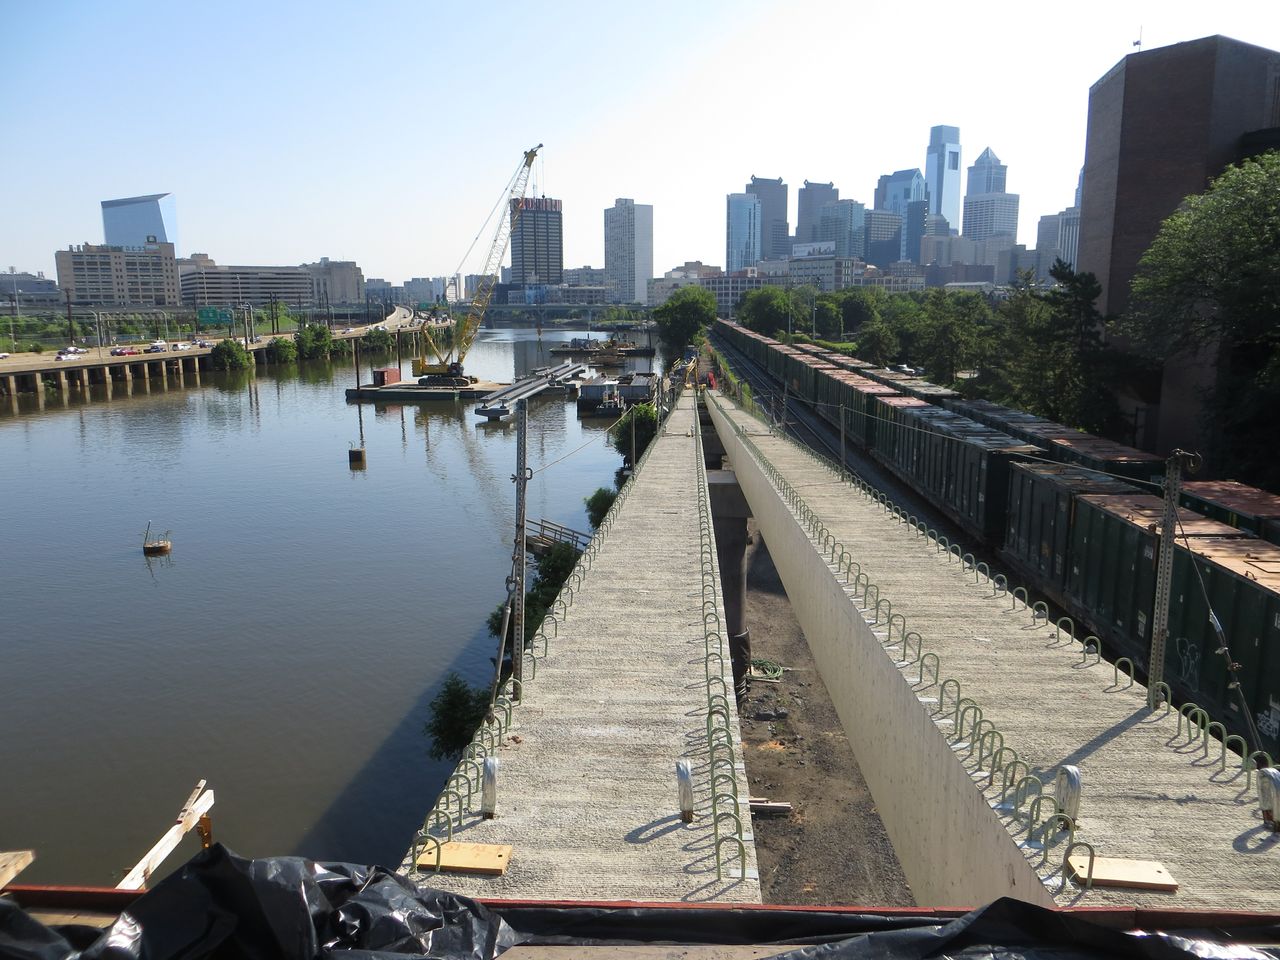 Looking down the future ramp, onlookers will find a clear Center City skyline view